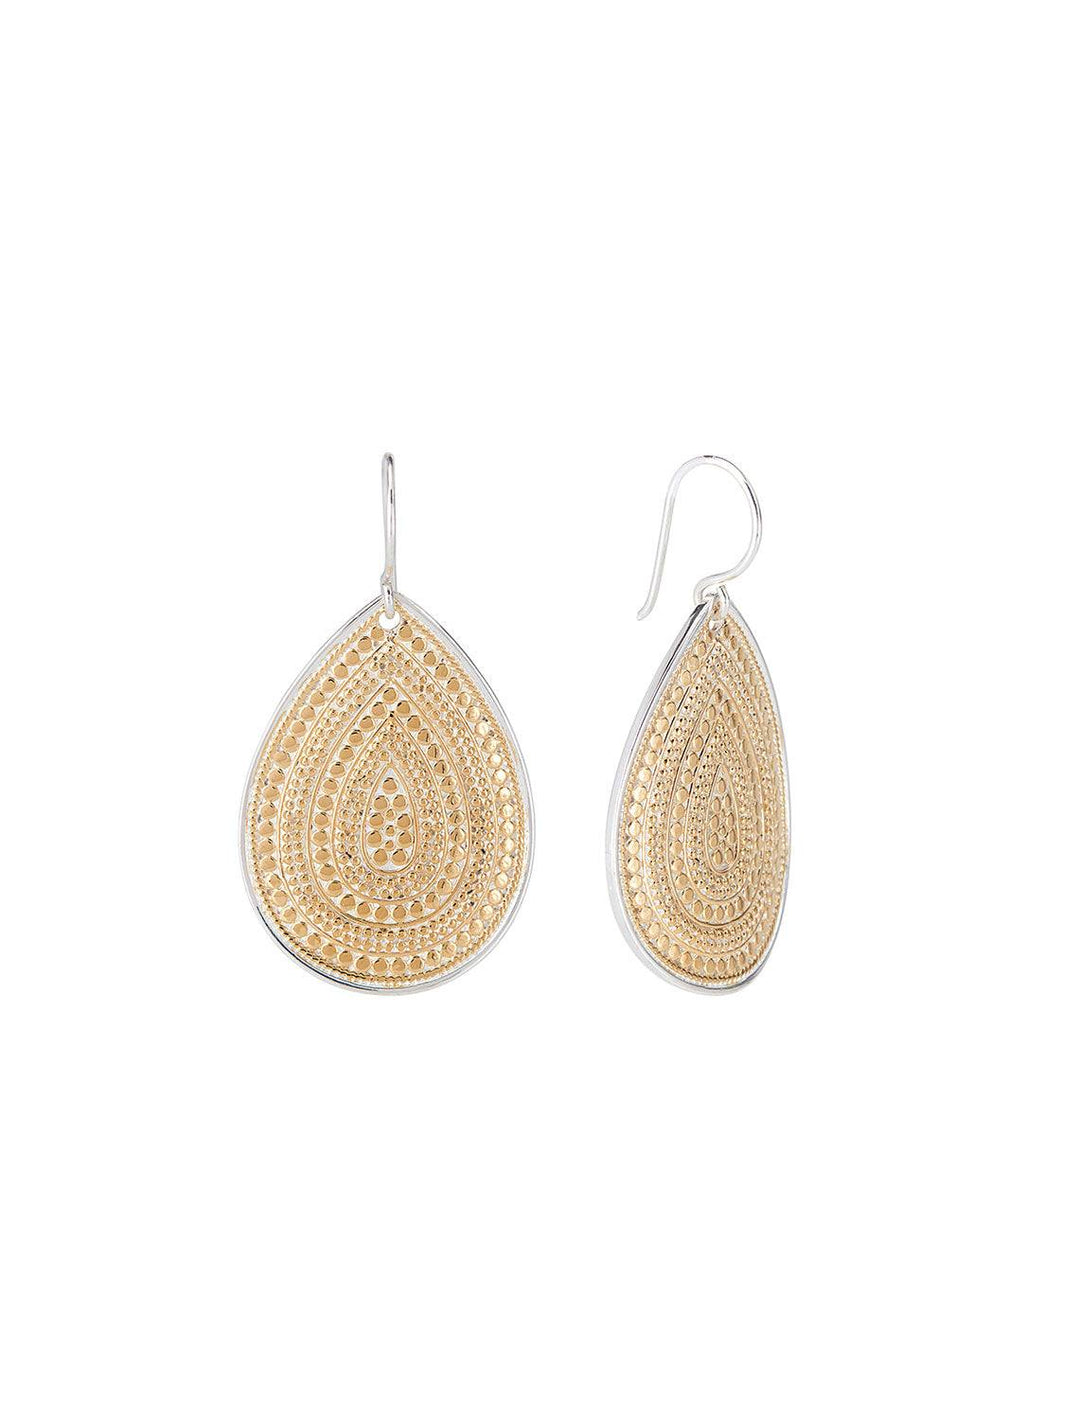 Anna Beck's classic large teardrop earrings in two-tone